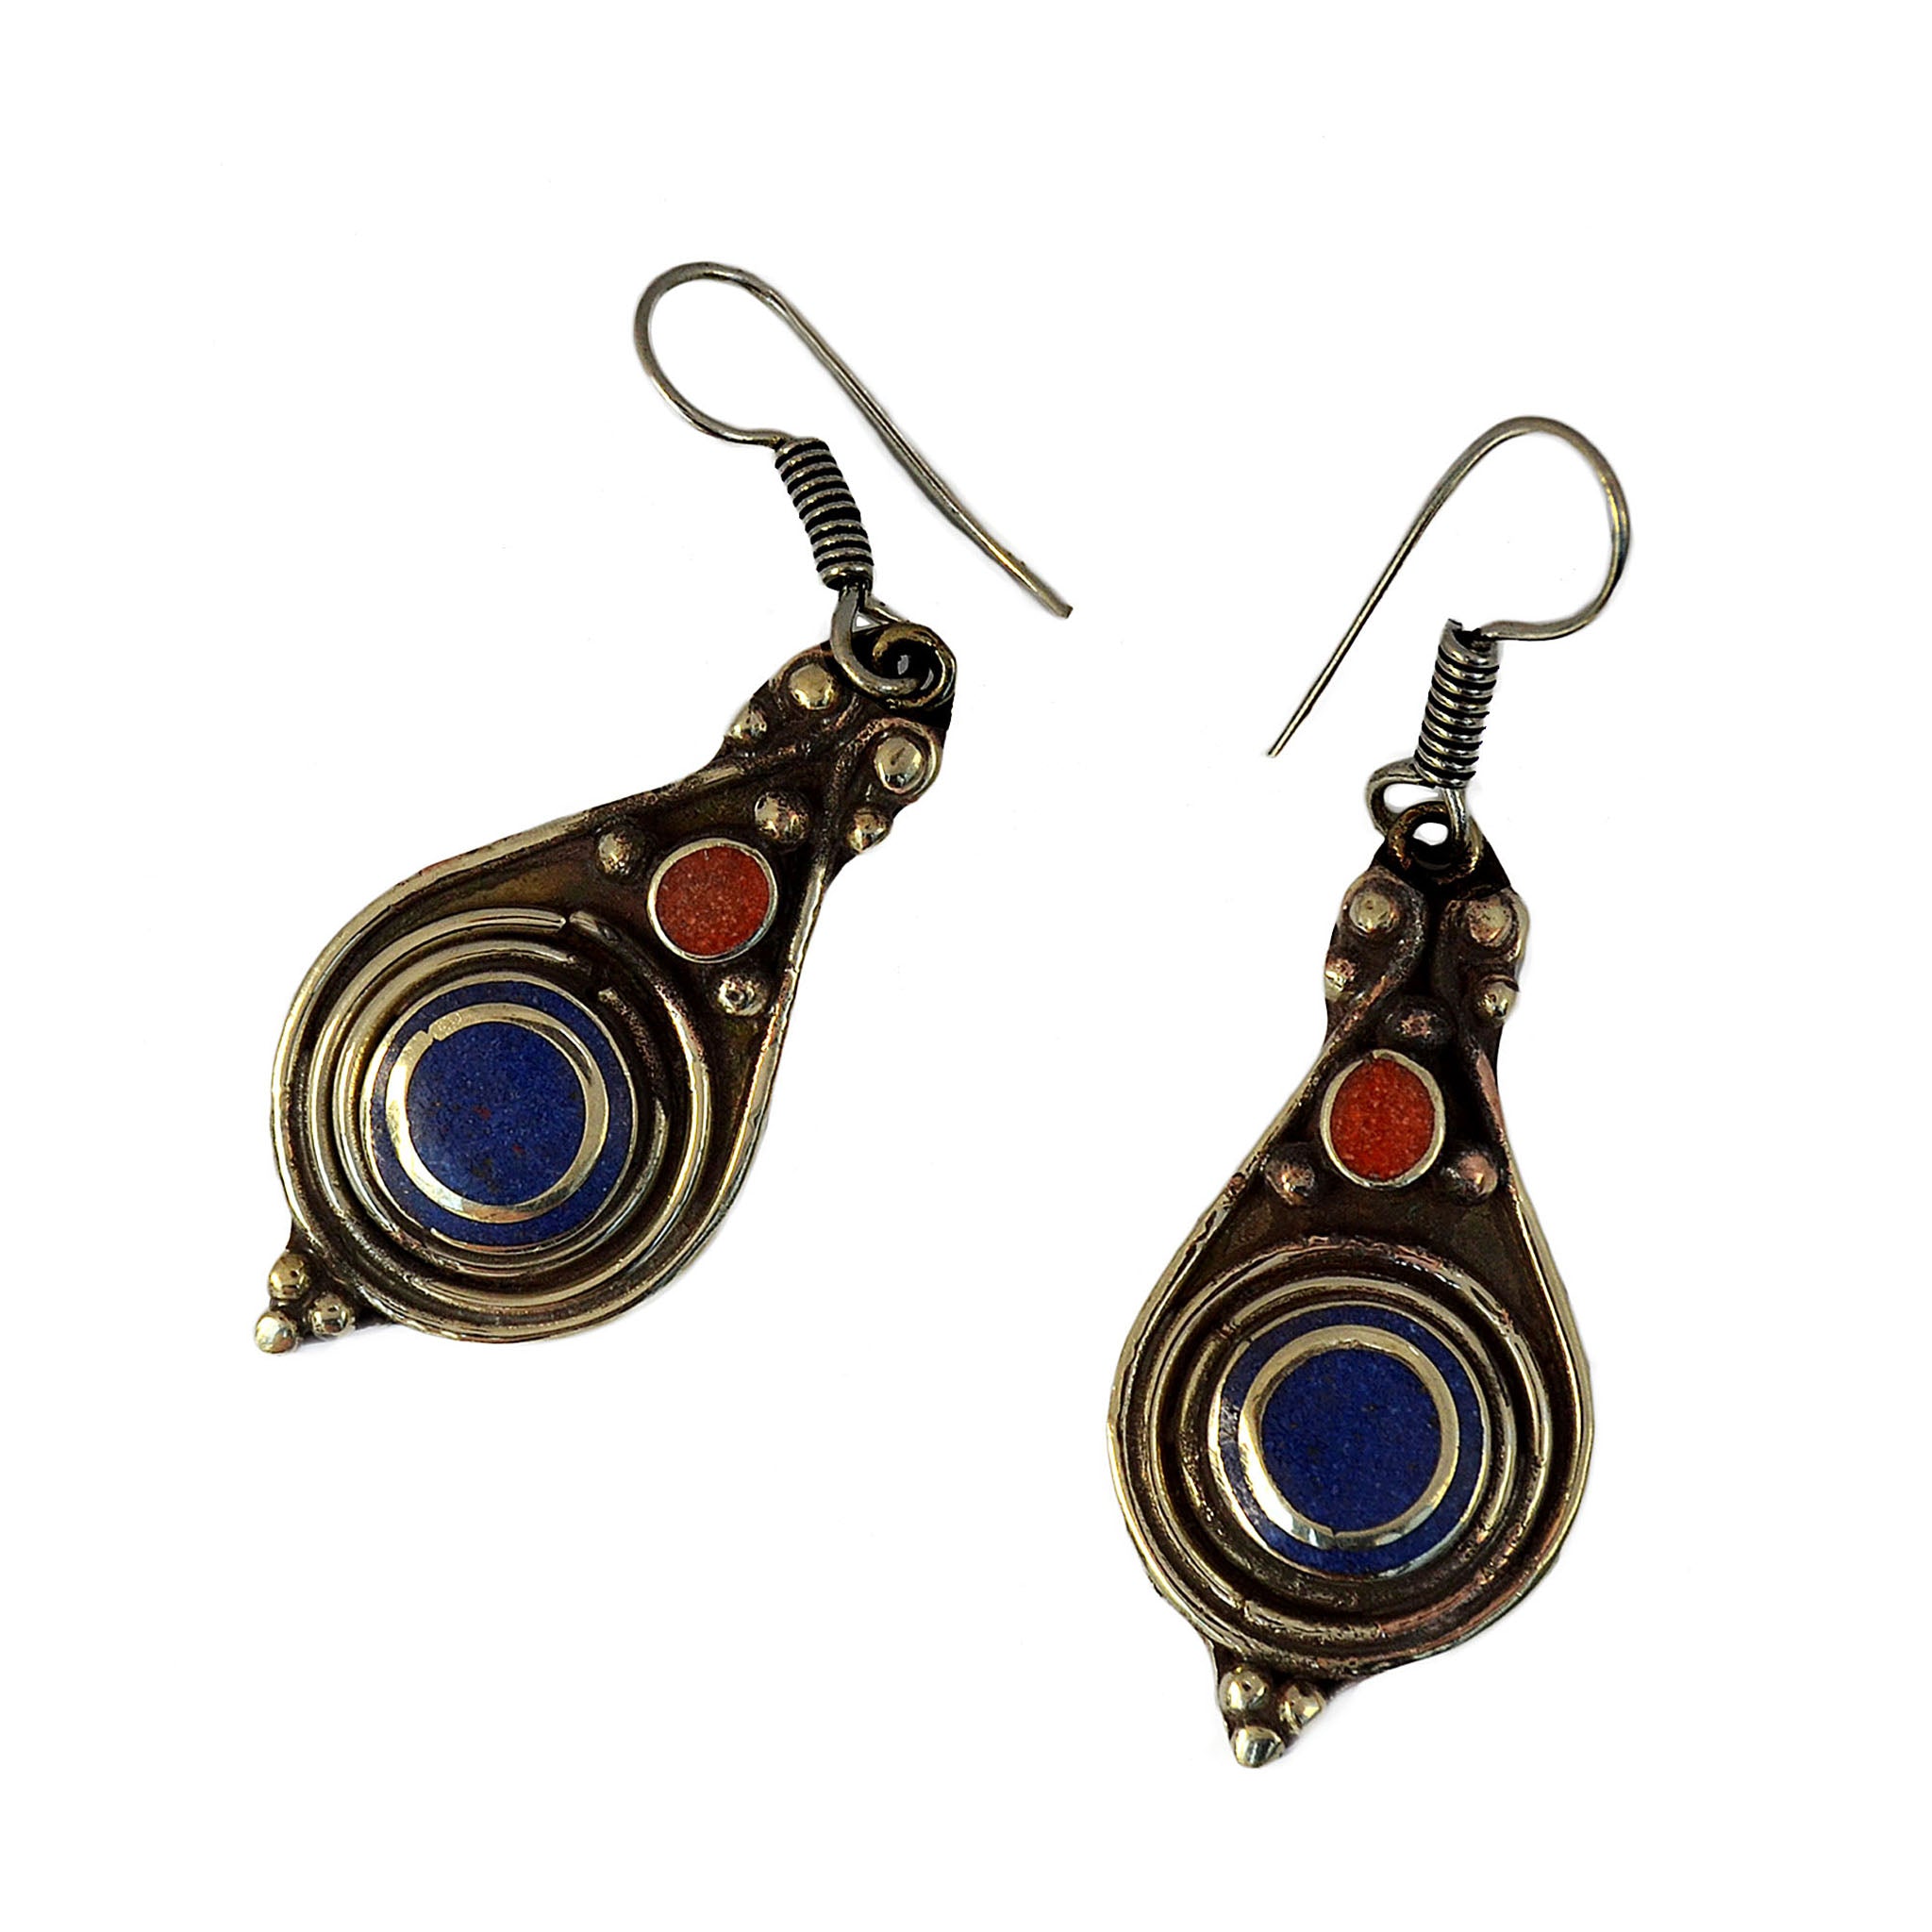 Tibetan drop silver earrings with inlay lapis lazuli and red coral stones